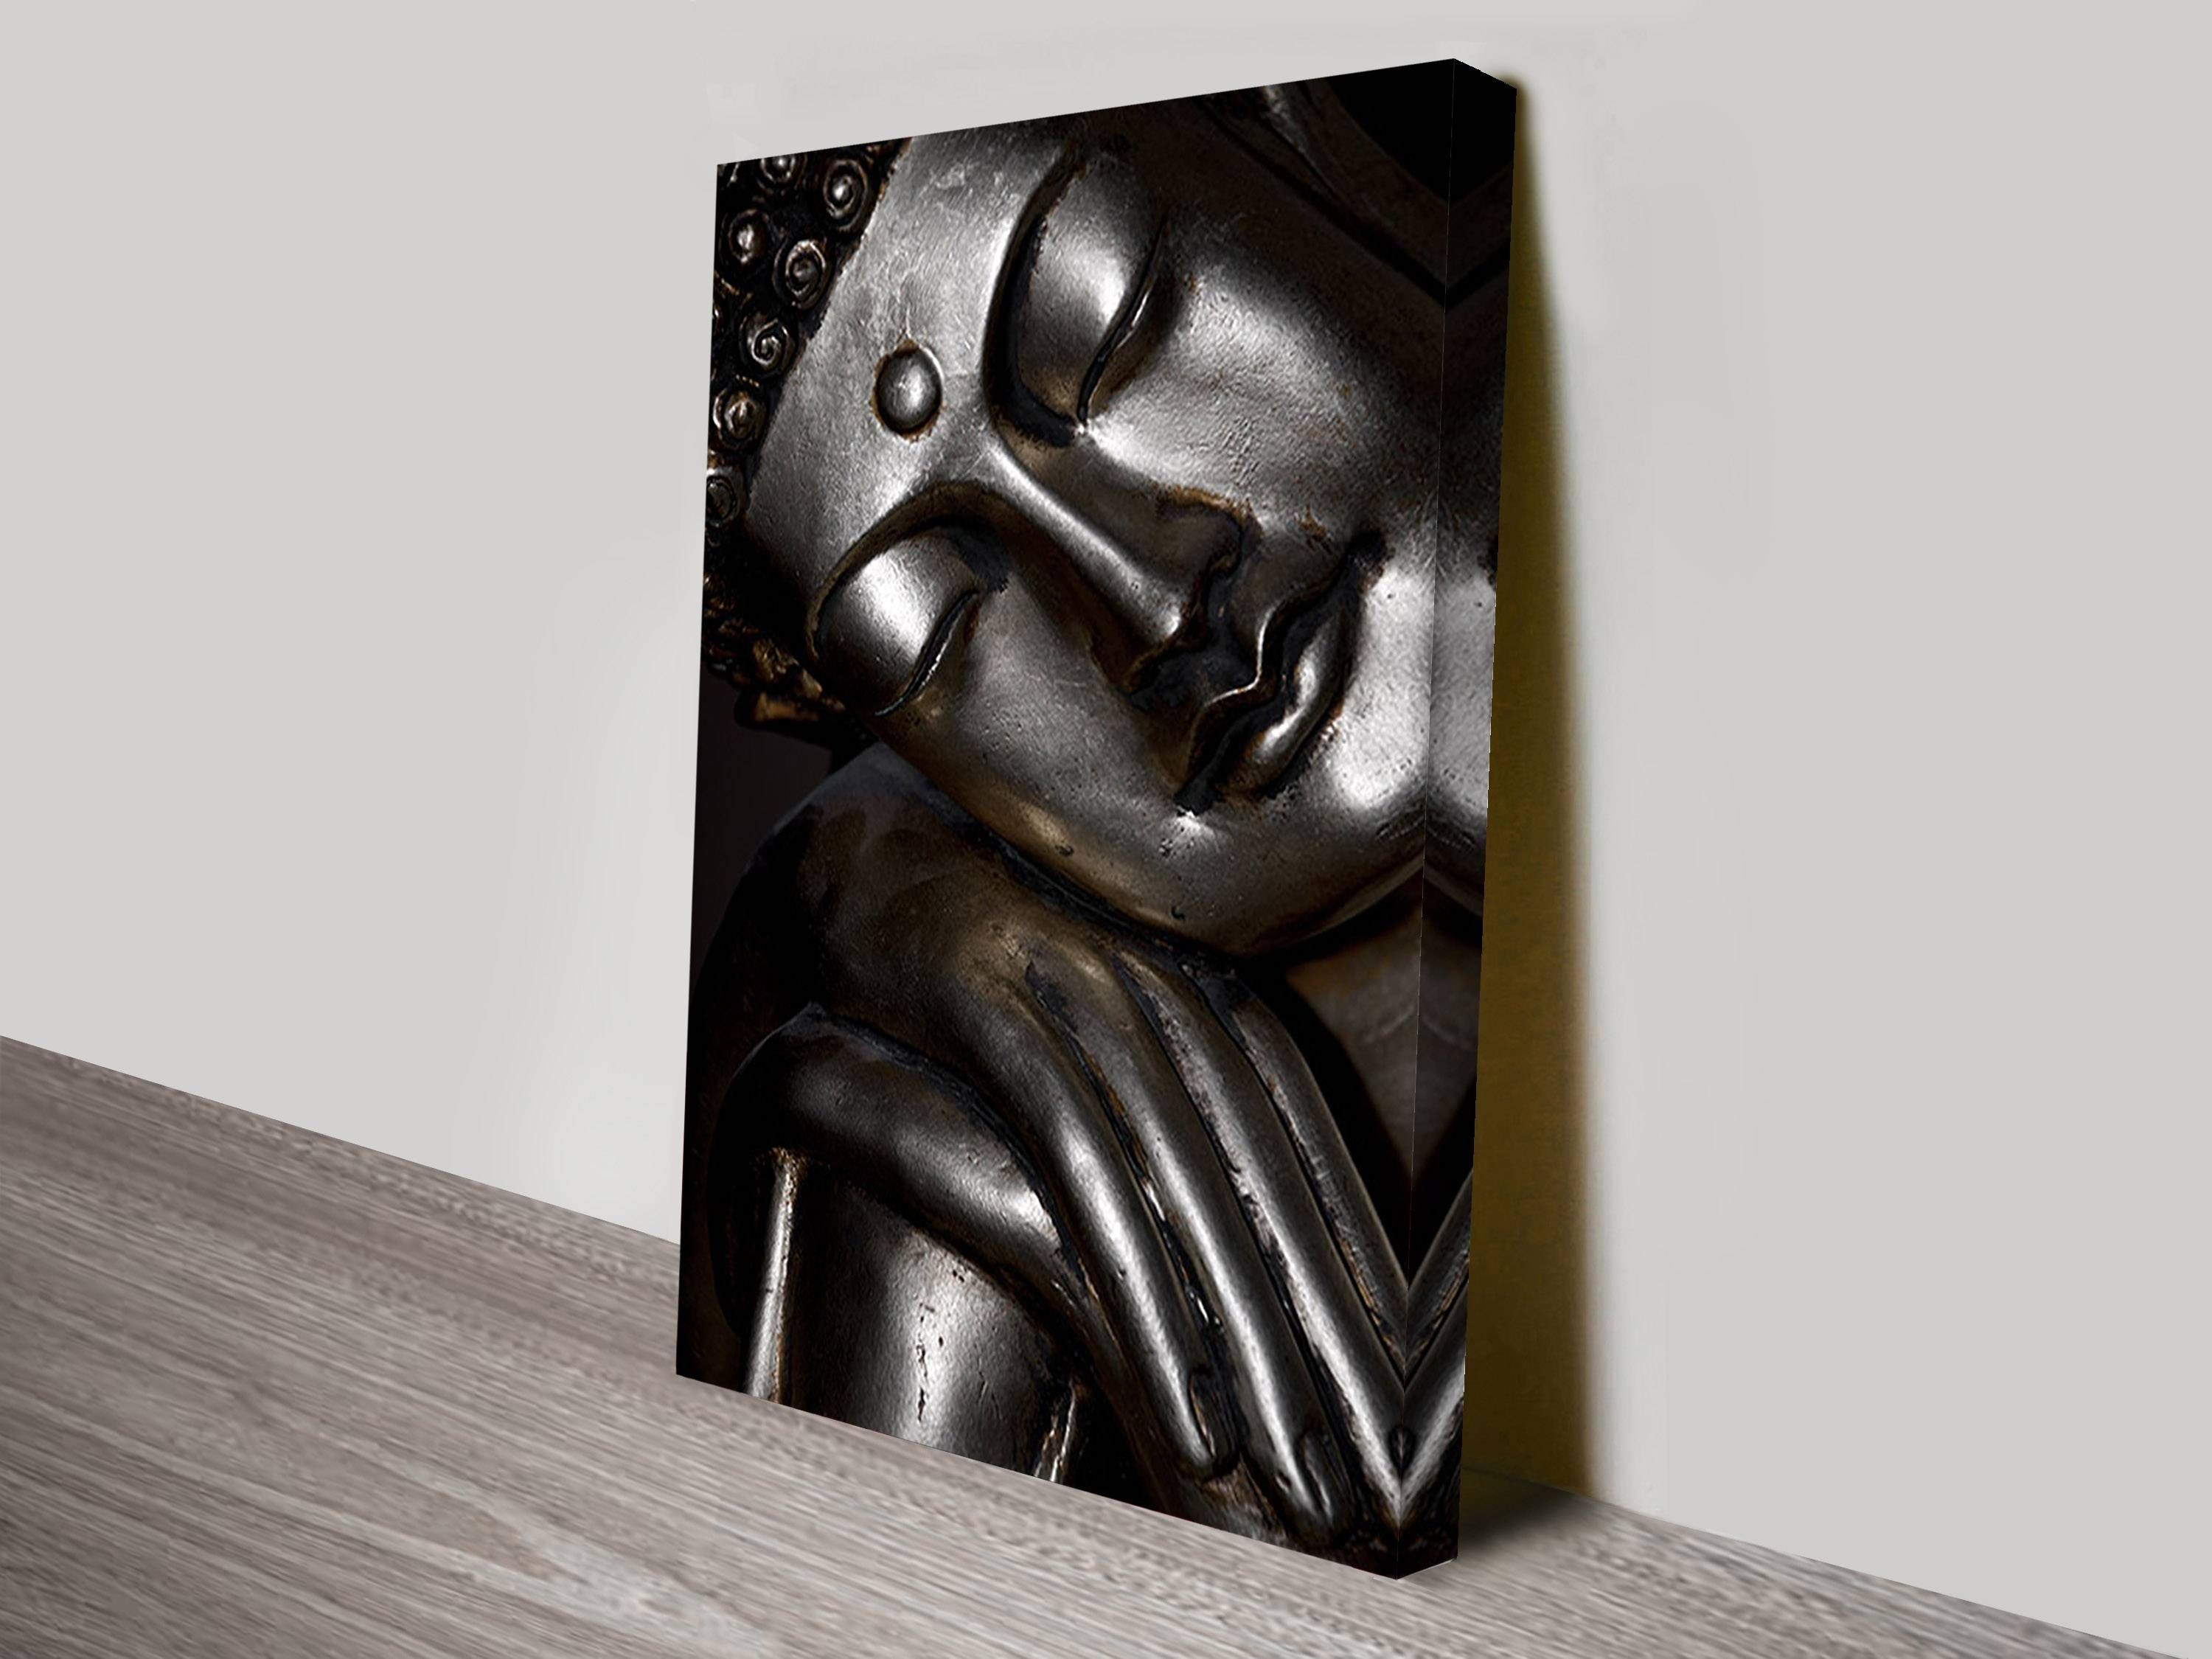 Buy Spirituality & Buddha Wrapped Canvas Prints & Wall Art Online With Regard To Current 3d Buddha Wall Art (View 10 of 20)